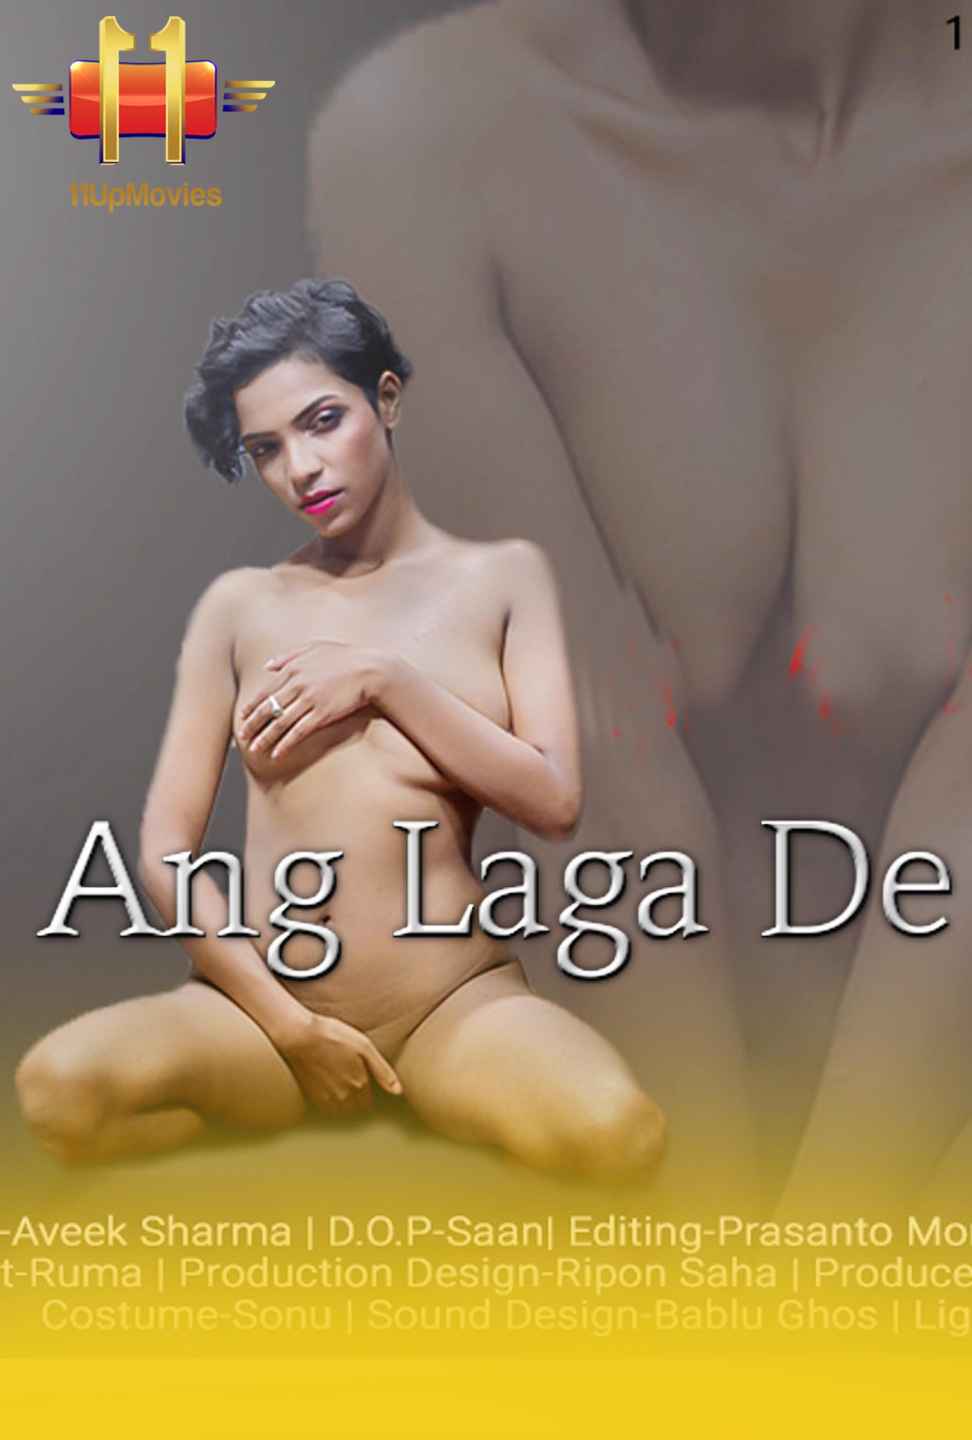 You are currently viewing Ang Laga De 2020 11UpMovies Originals Hot Video 720p HDRip 150MB Download & Watch Online